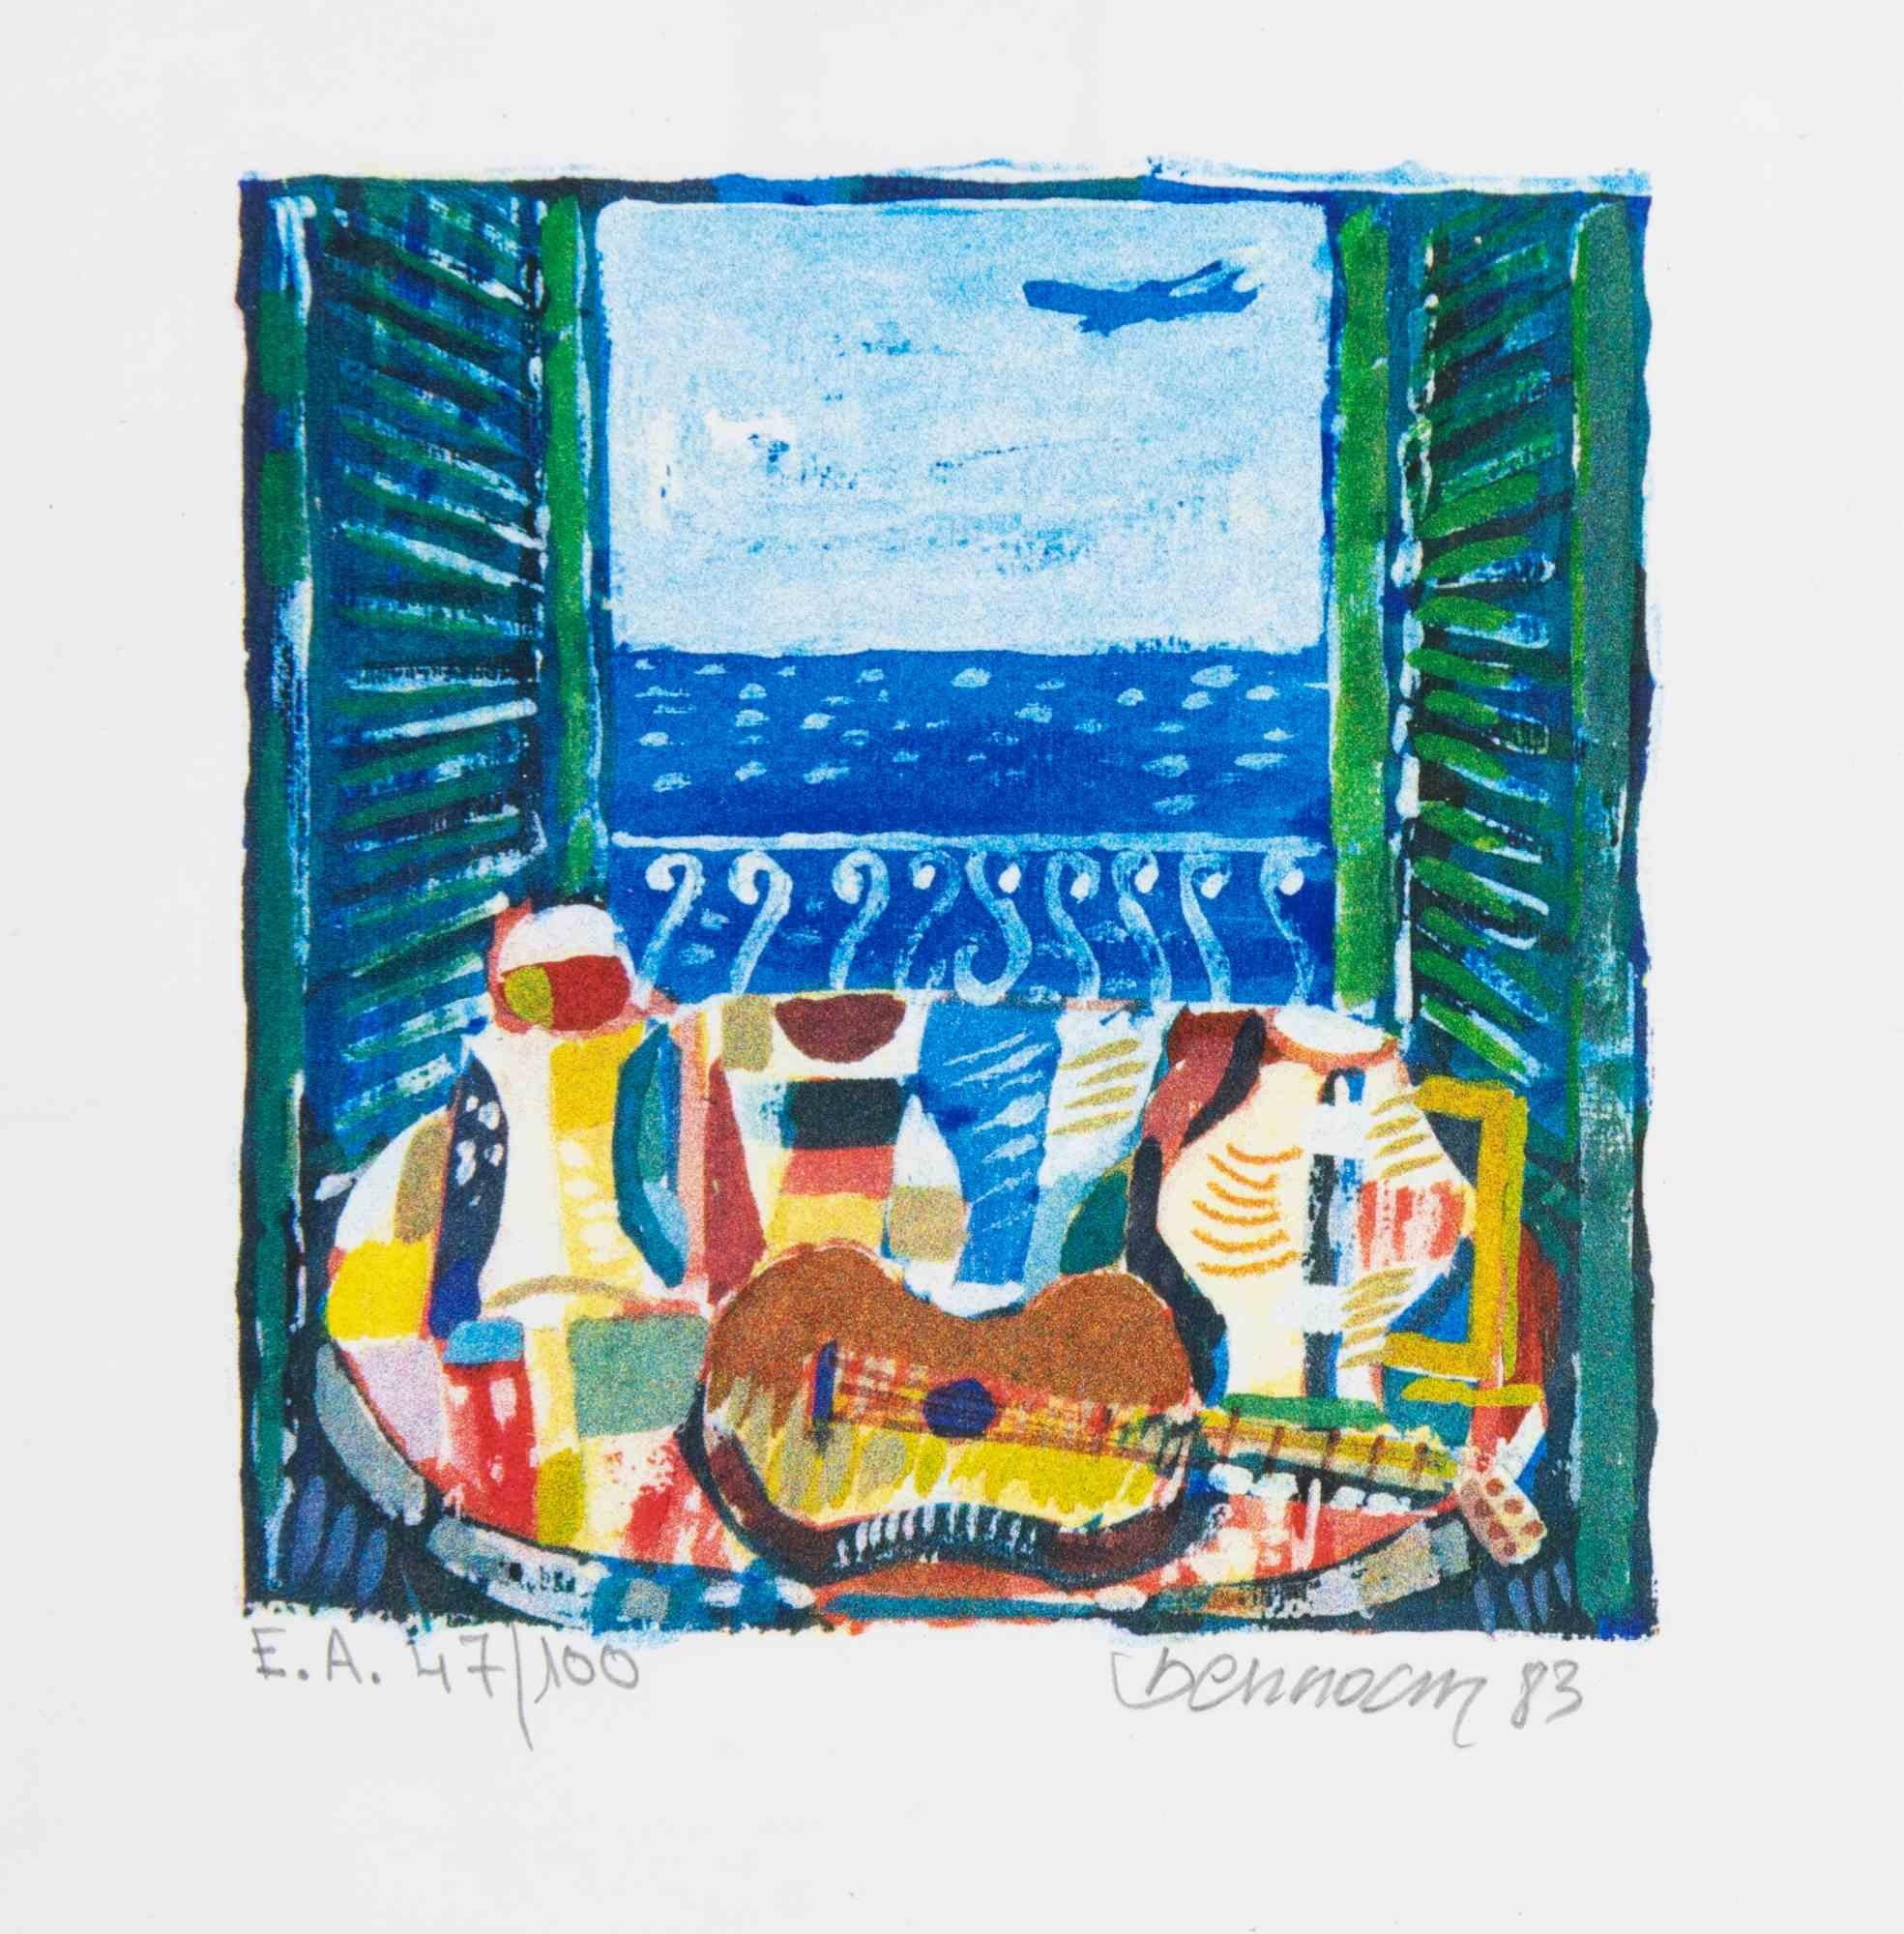 Seaview window with mandolin is a contemporary artwork realized by Ennio Bencini in 1983.

Mixed colored lithograph.

Han dsigned and dated on the lower margin.

Numbered on the lower left.

Edition of 47/100.